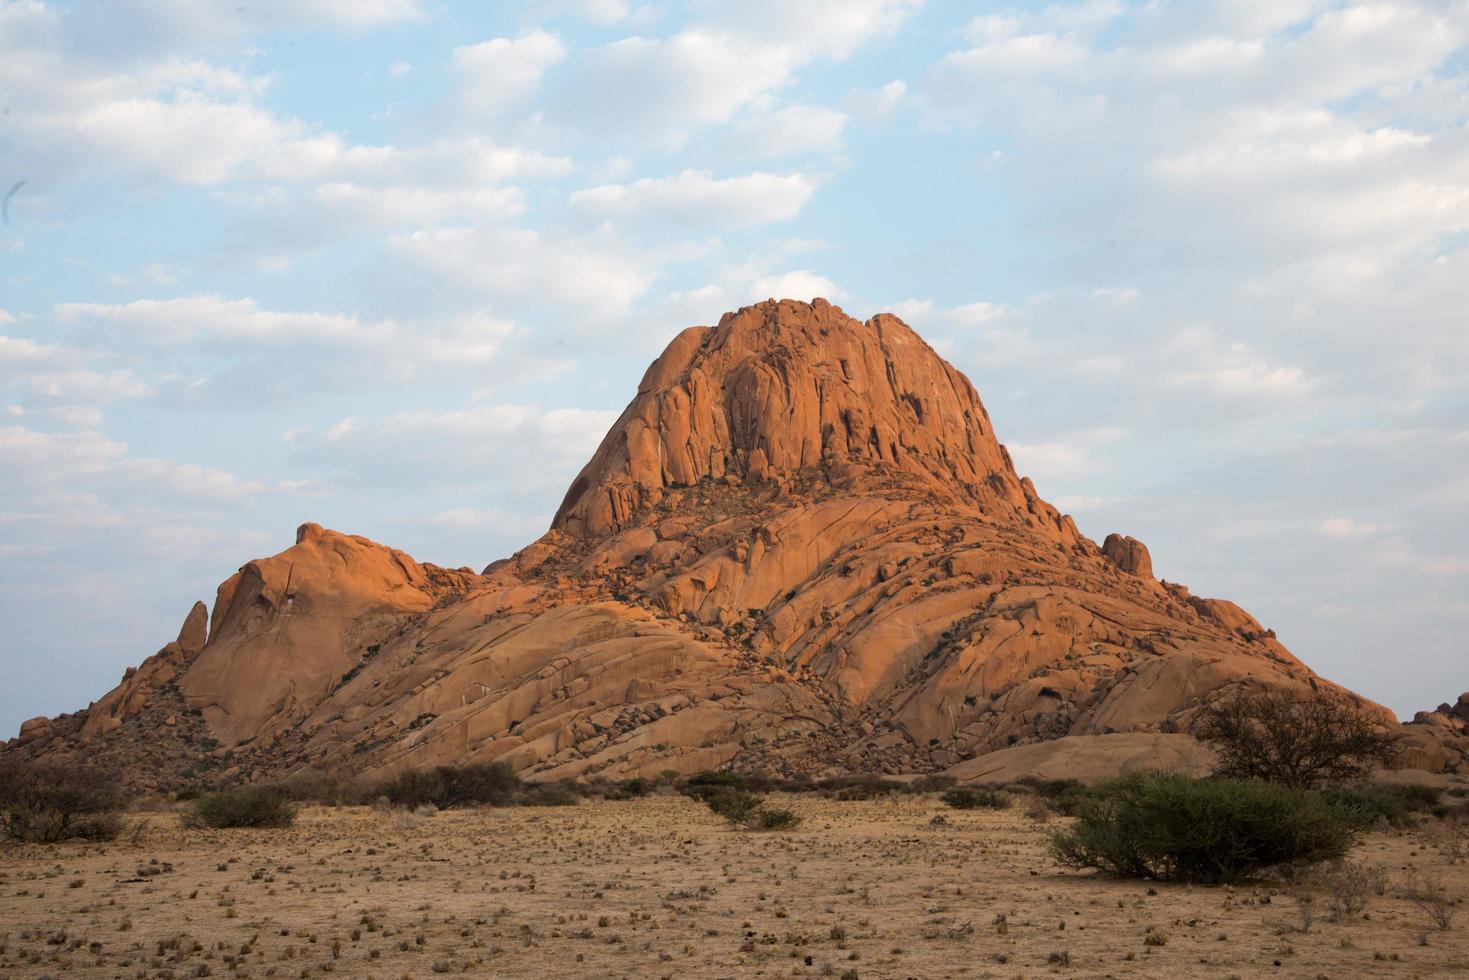 Beautiful stone mountain in Damaraland. Morning light, some clouds, no people. Namibia photo